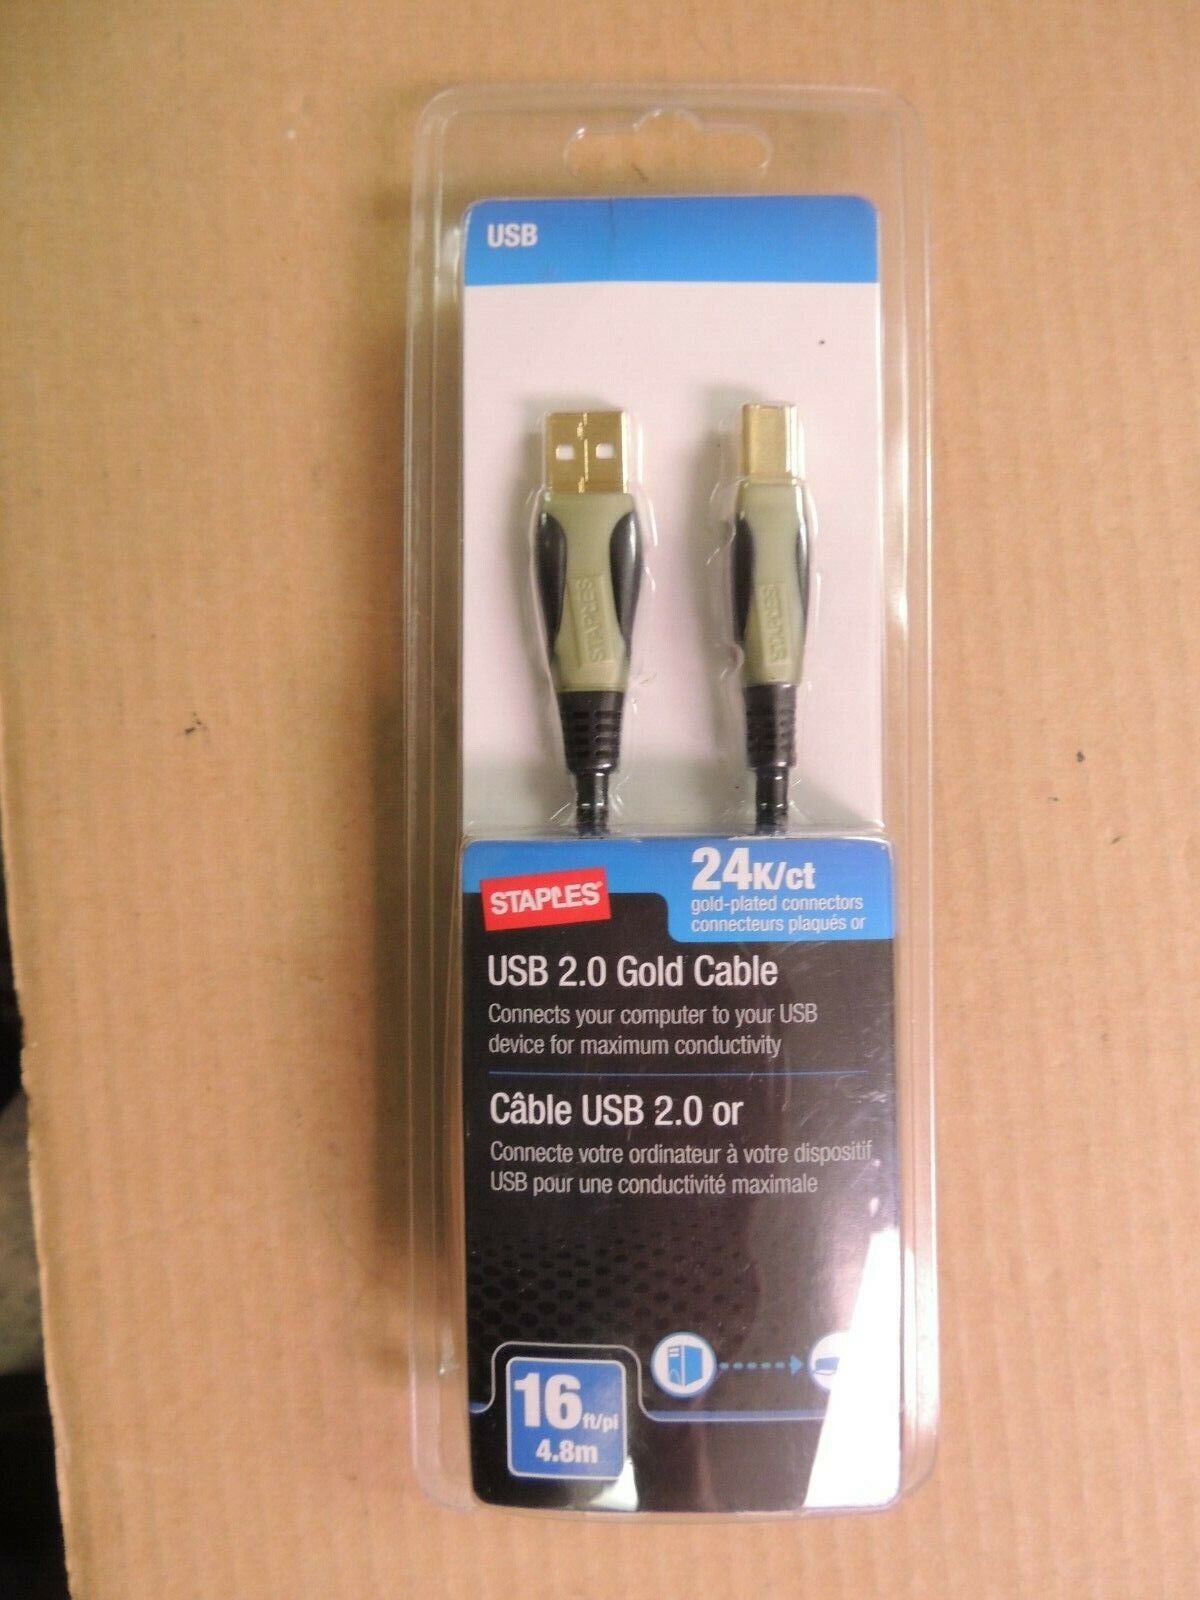 Staples 16\' Gold Series A/B USB 2.0 Cable USB 2.0 Gold Cable 24K/Ct NIP